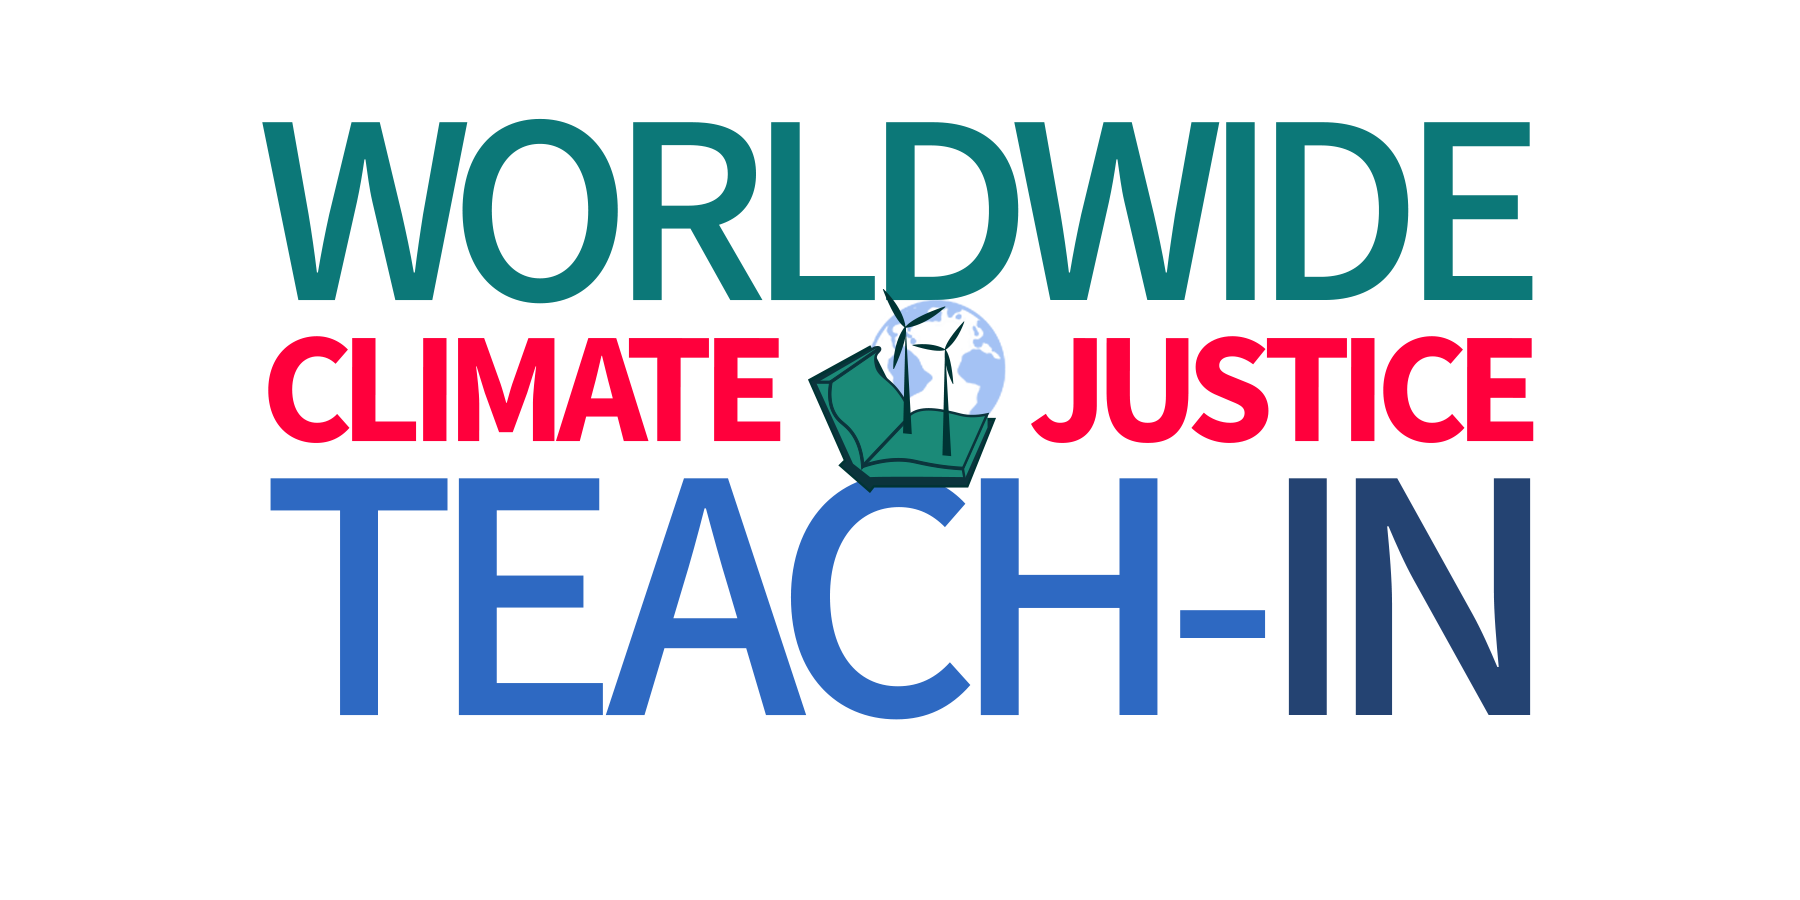 Worldwide Teach-In on Climate and Justice